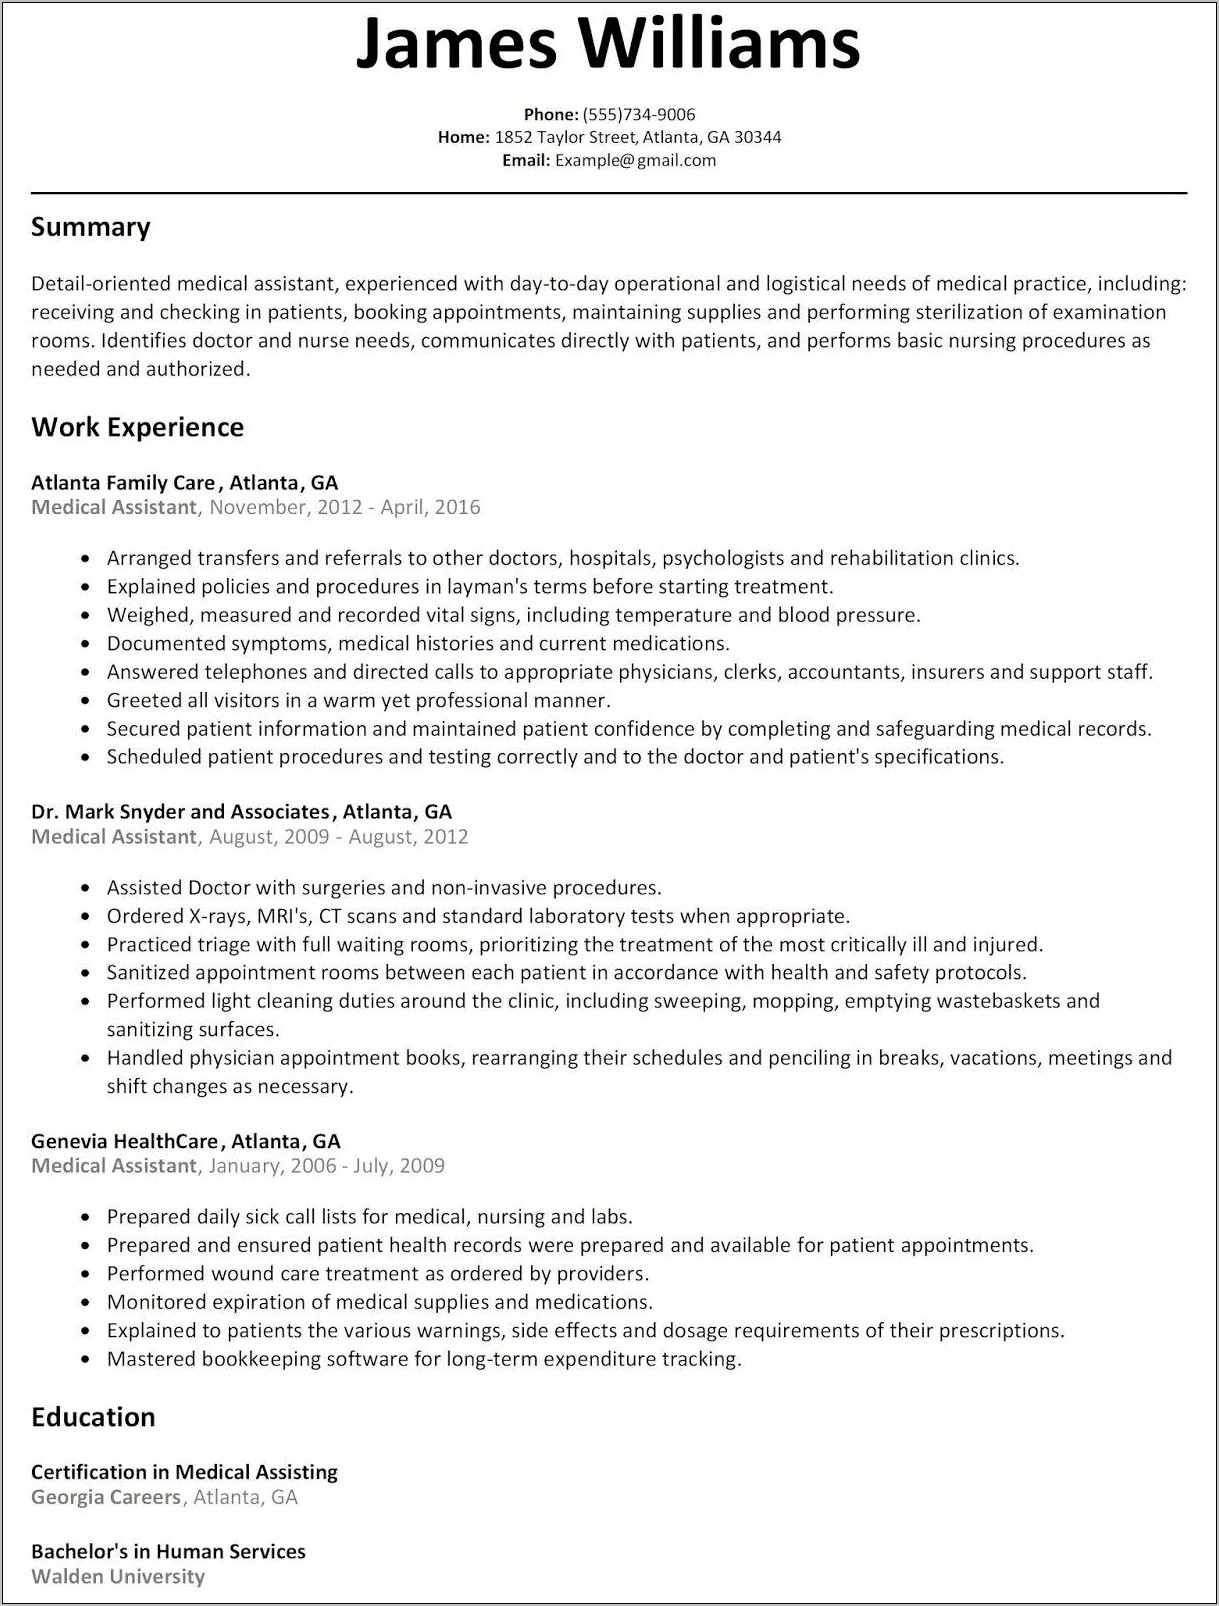 Objective For Resume Police Officer No Experience